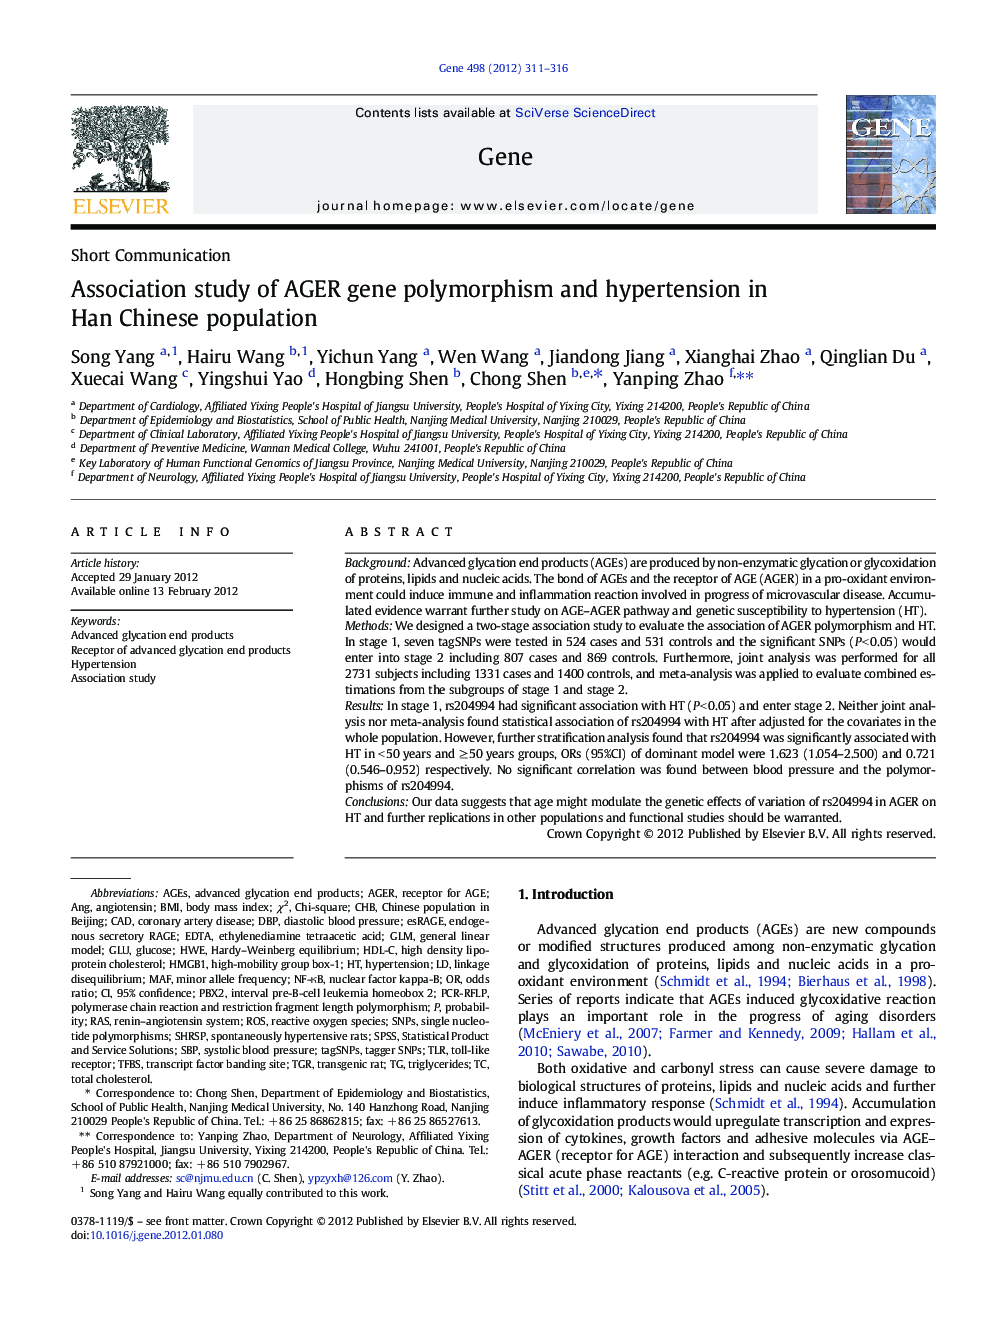 Association study of AGER gene polymorphism and hypertension in Han Chinese population